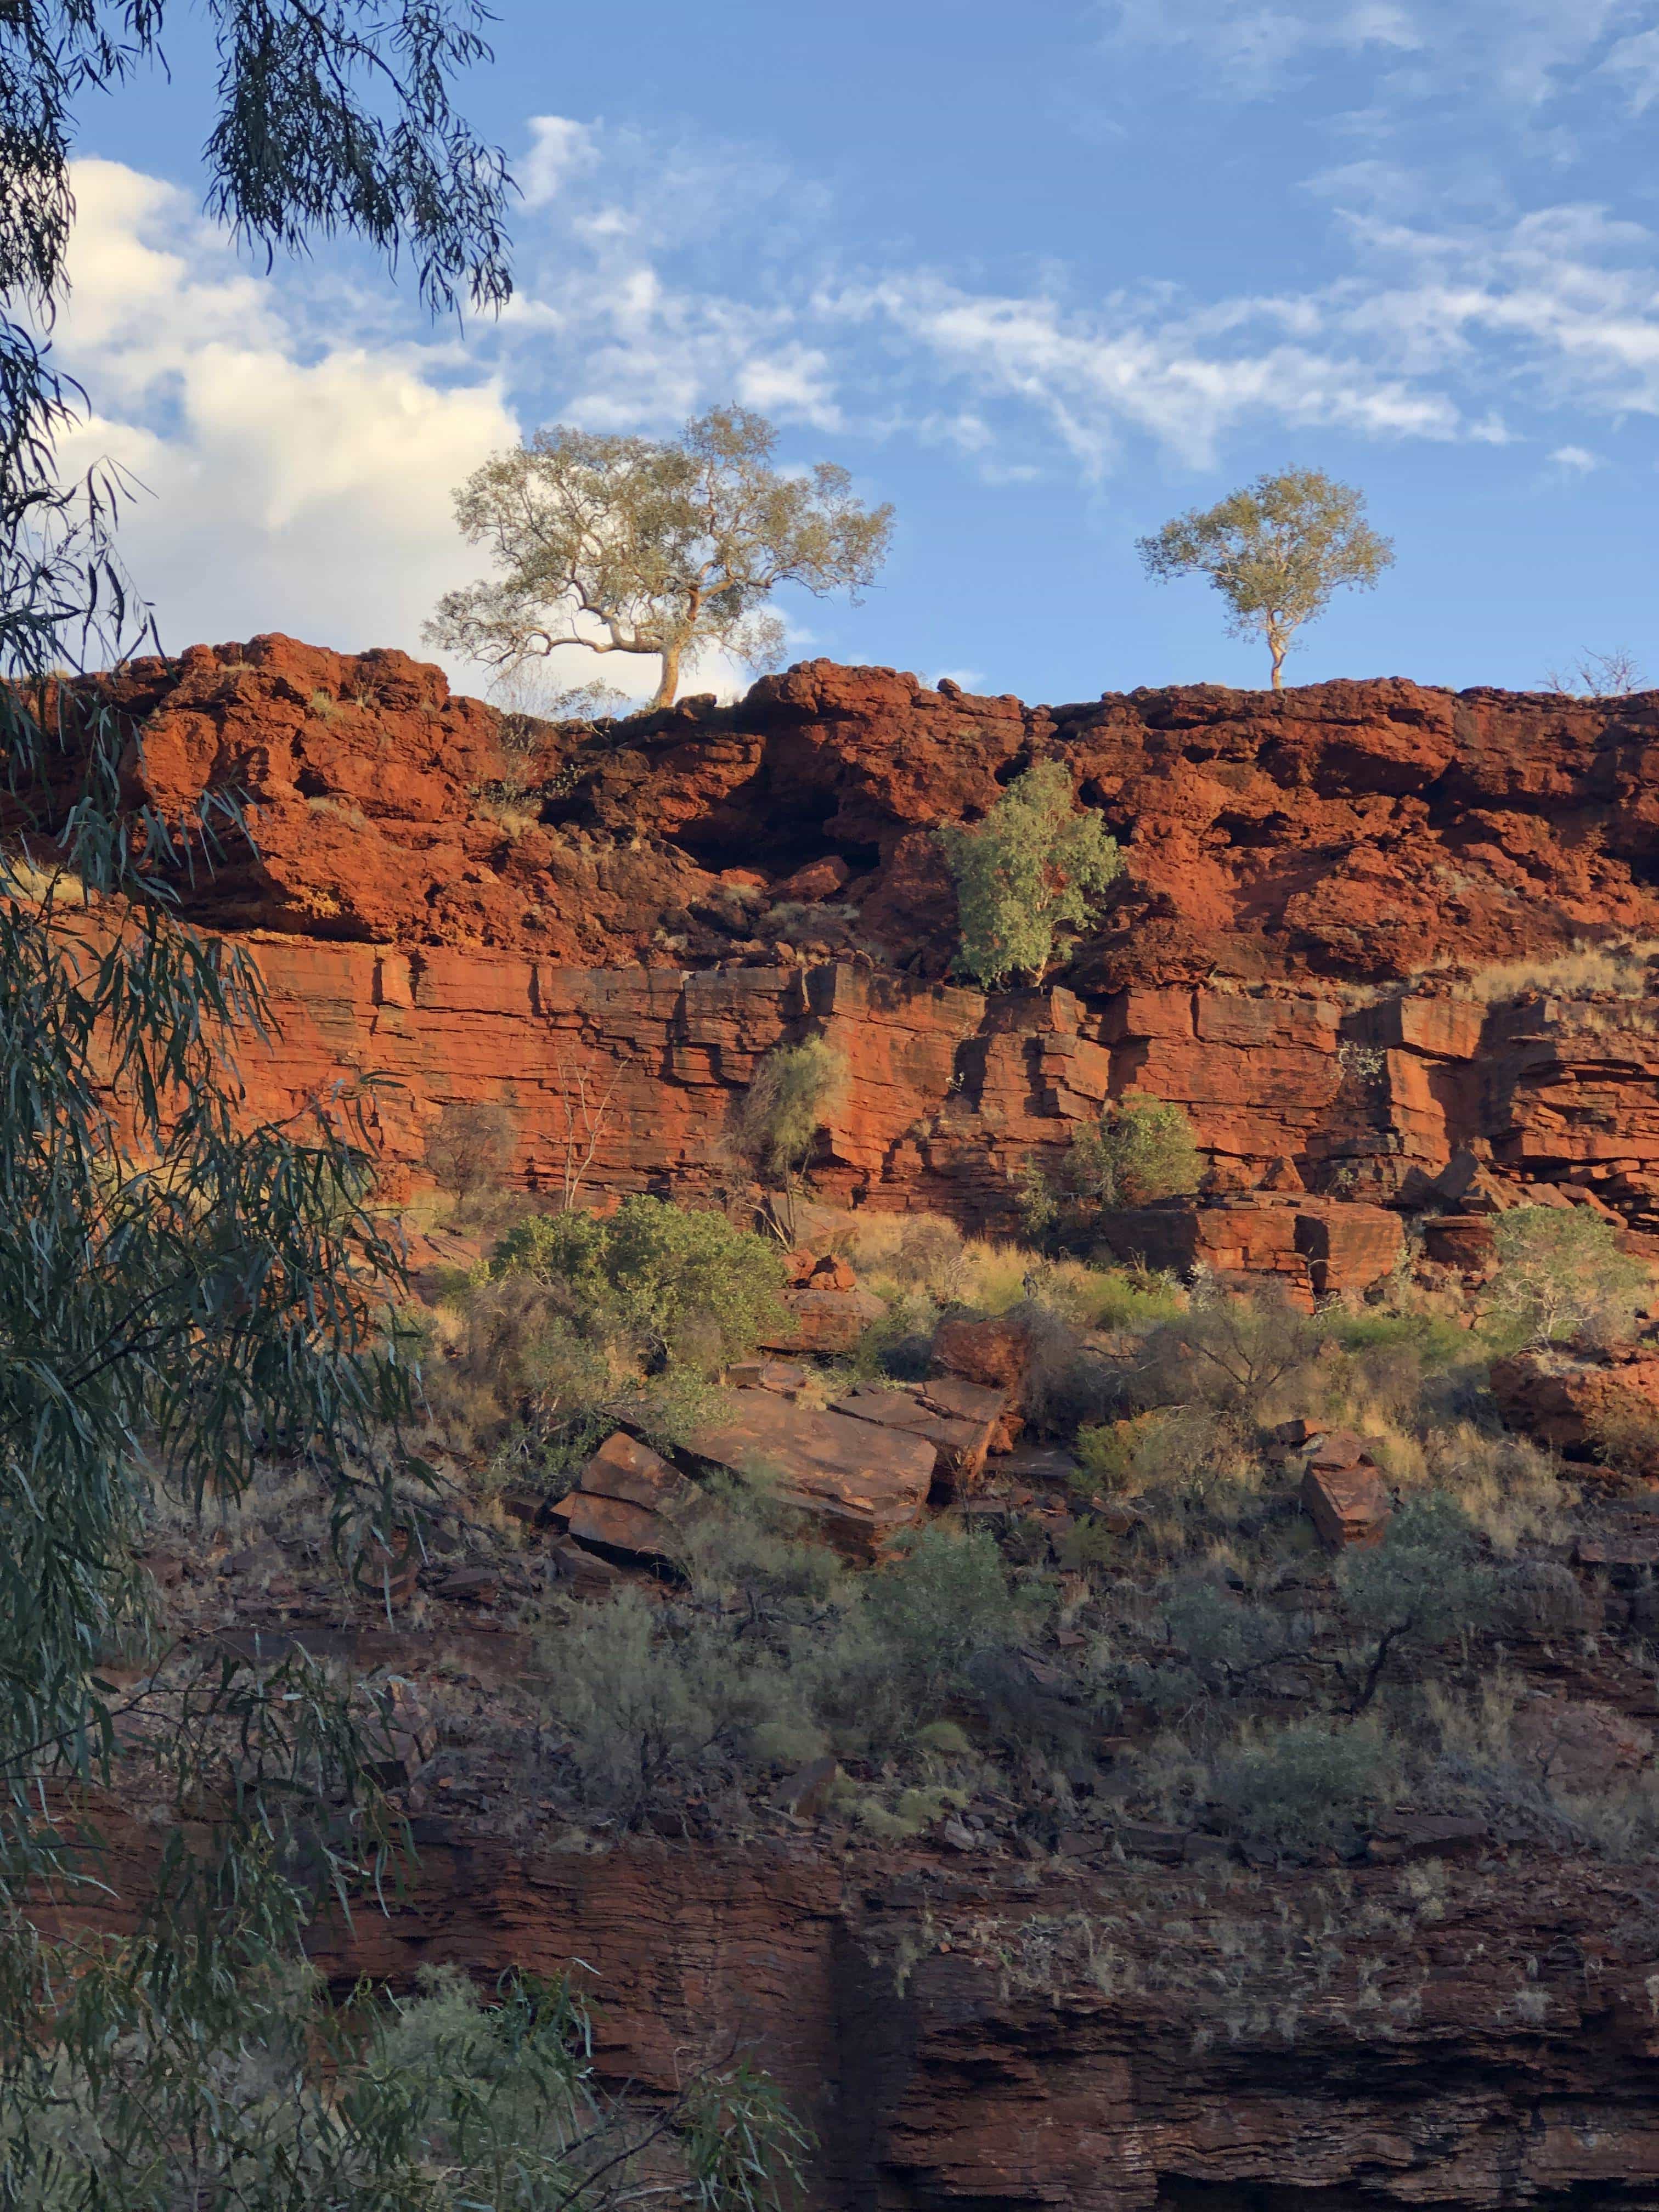 Sunset colours over Dales Gorge